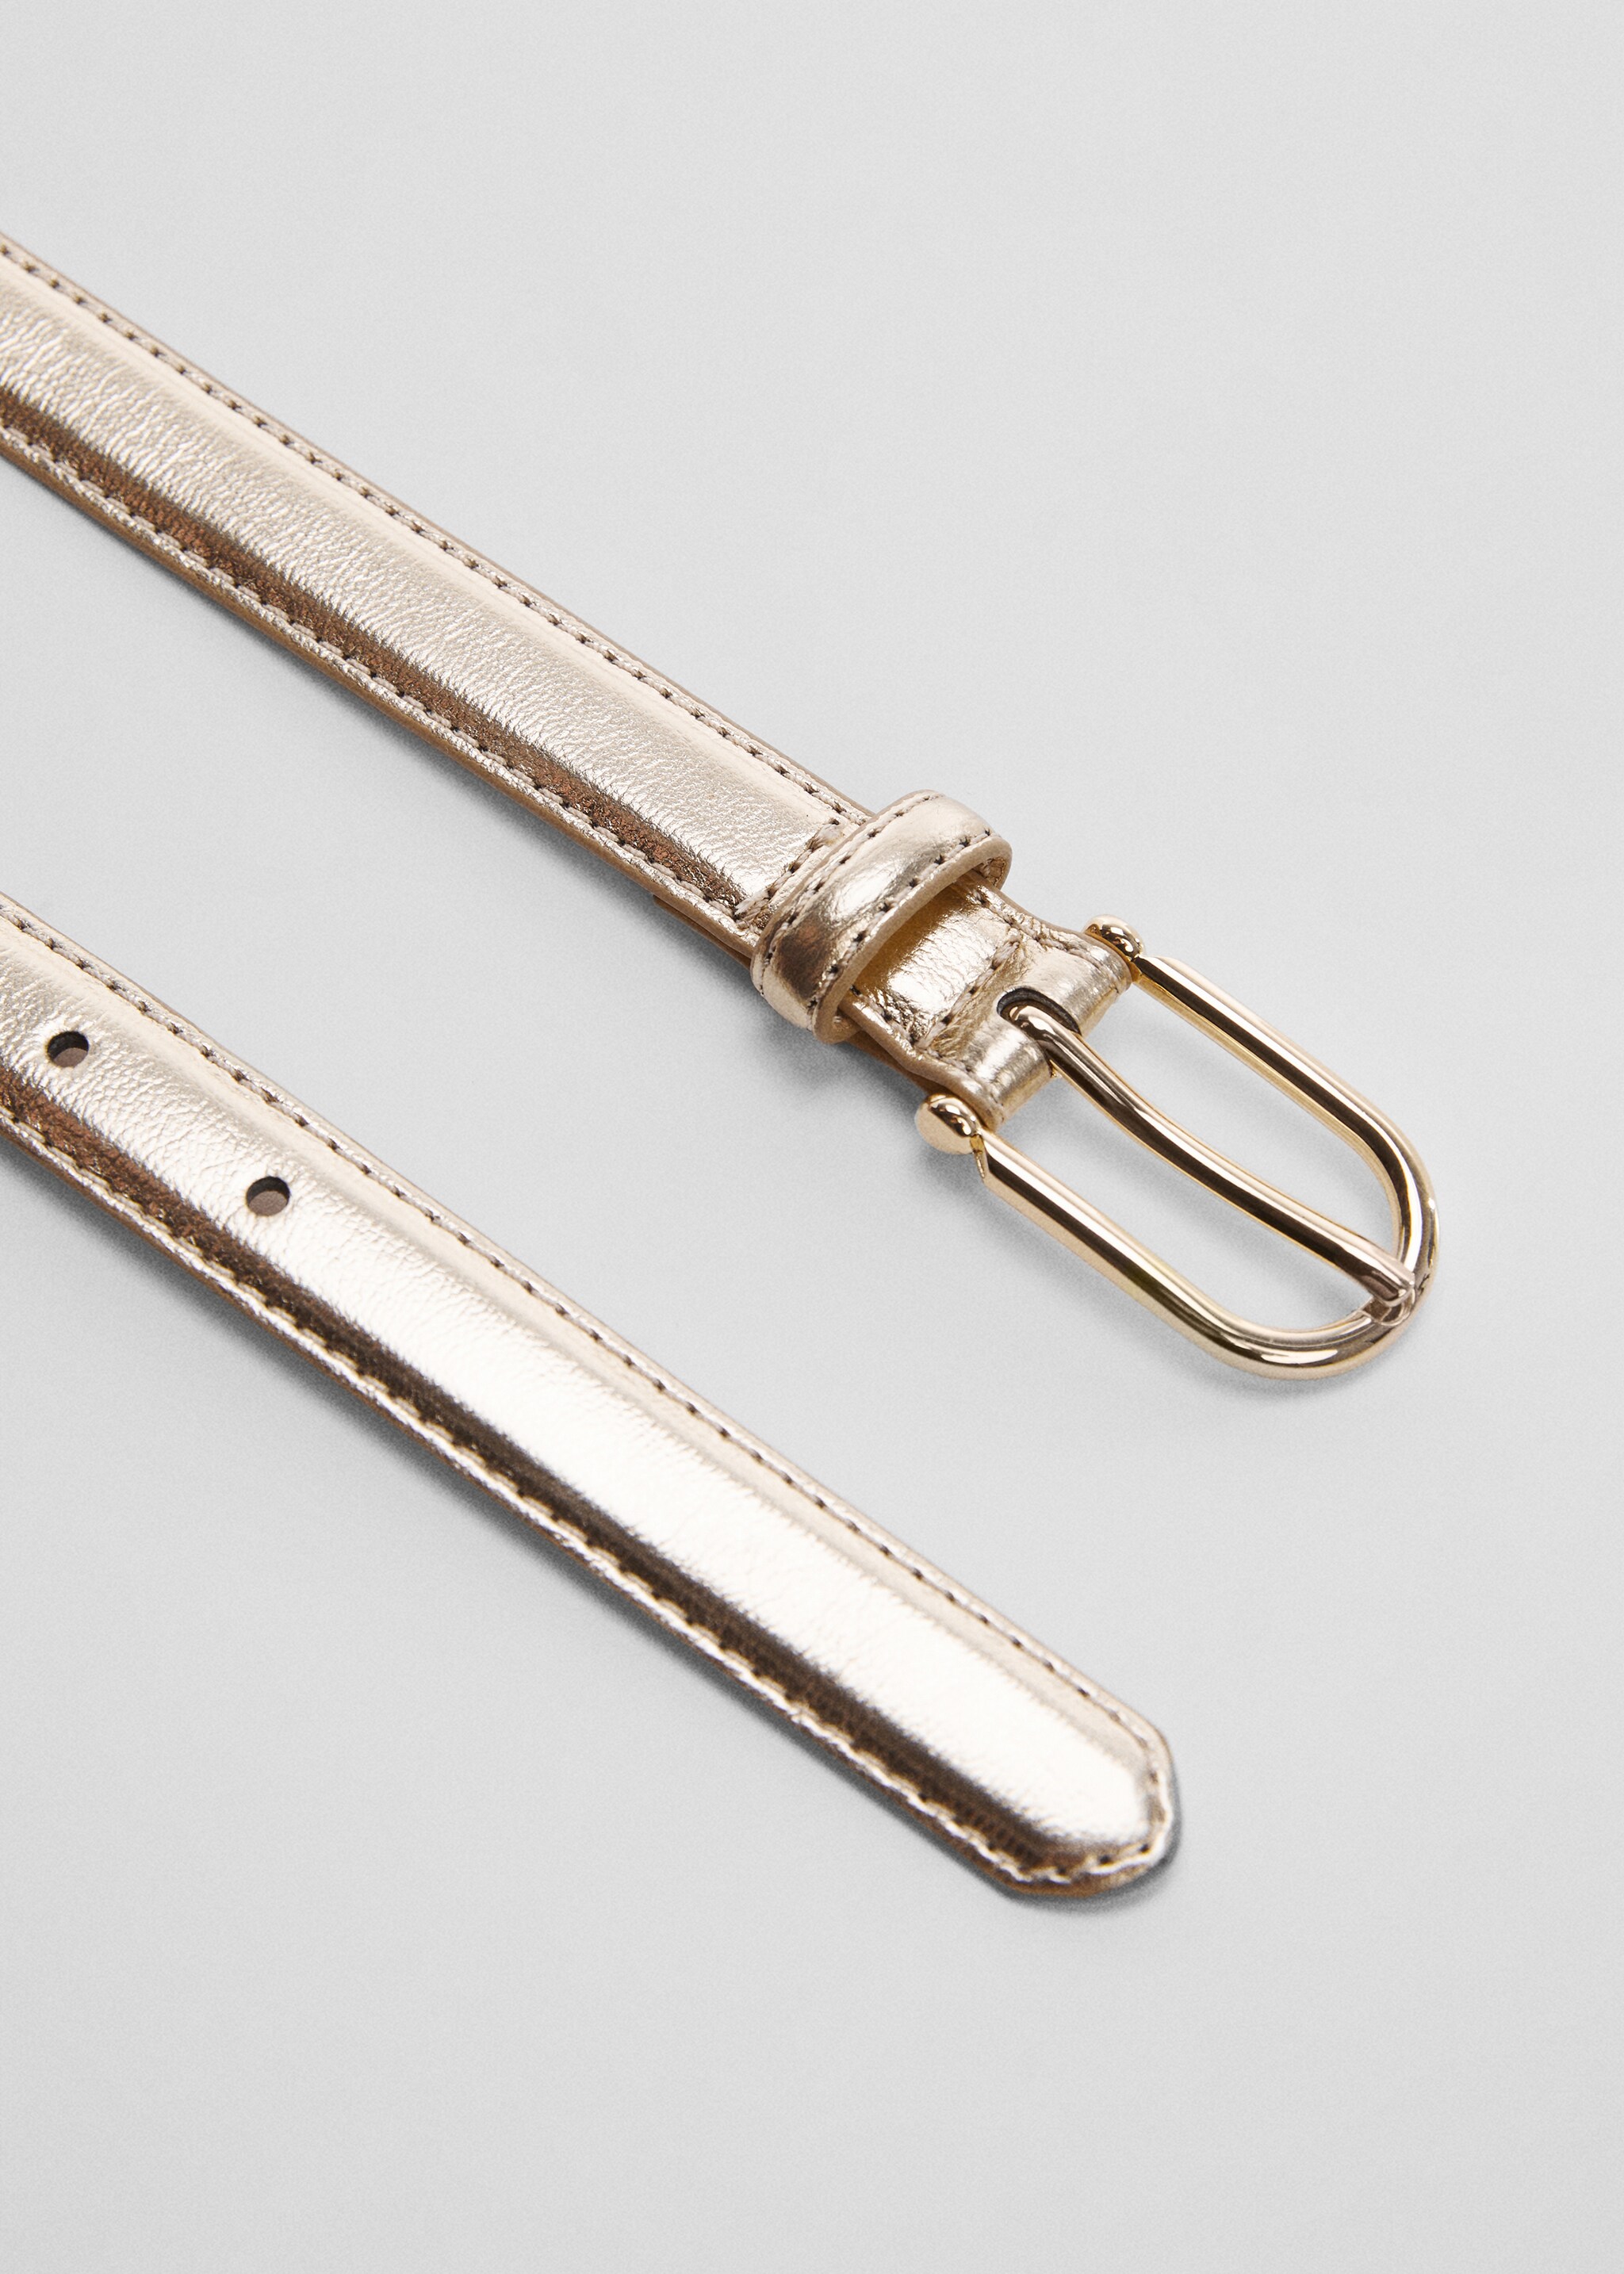 Buckle skinny belt - Details of the article 1